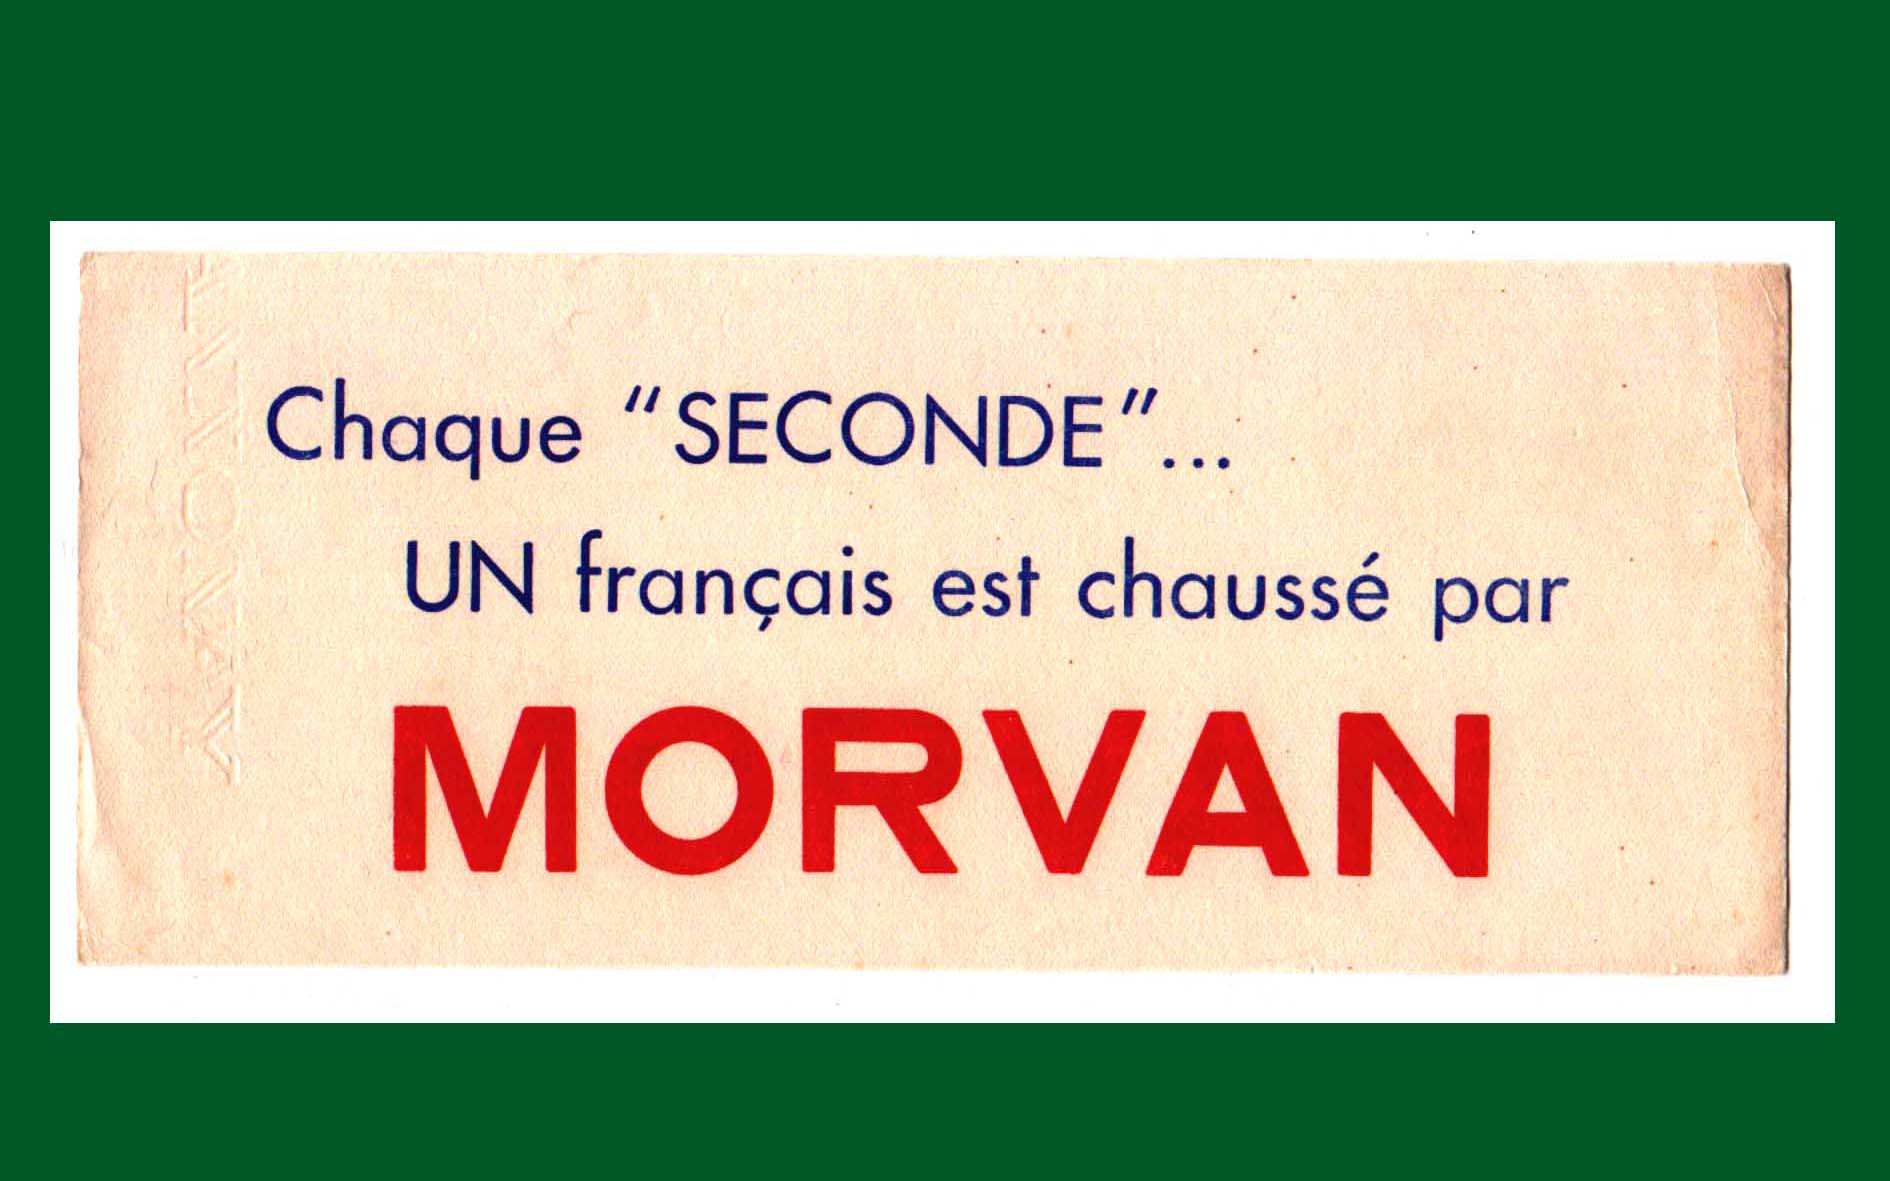 MORVAN CHAUSSURES - Chaussures